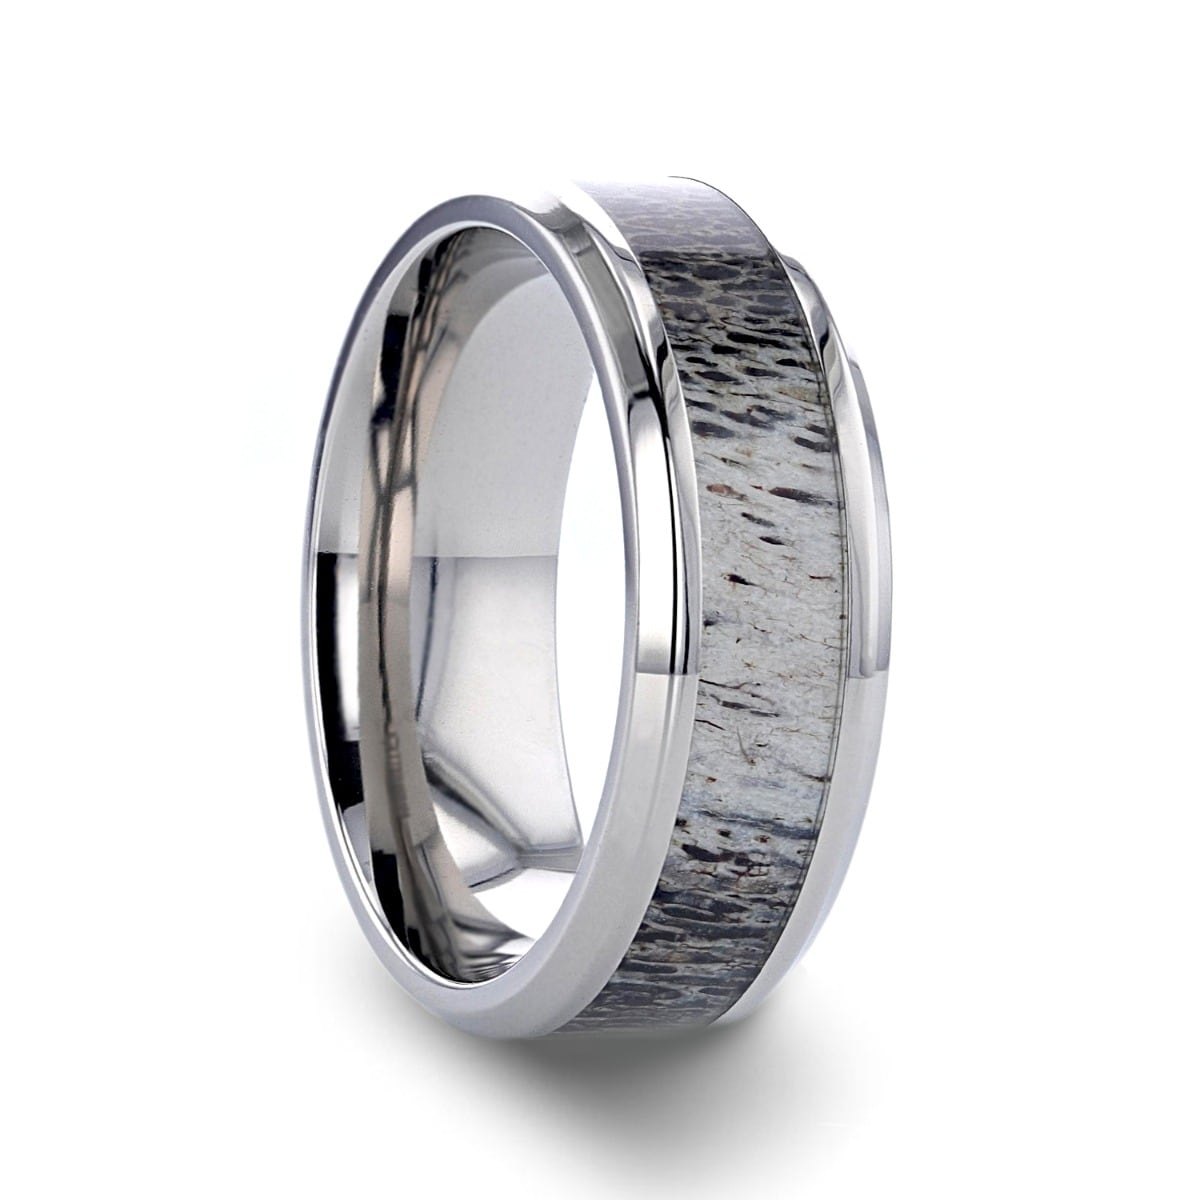 Thorsten Caribou | Titanium Rings for Men | Polished Beveled Titanium Men's  Wedding Band with Ombre Deer Antler Inlay - 8 mm - On Sale - Overstock -  28987102